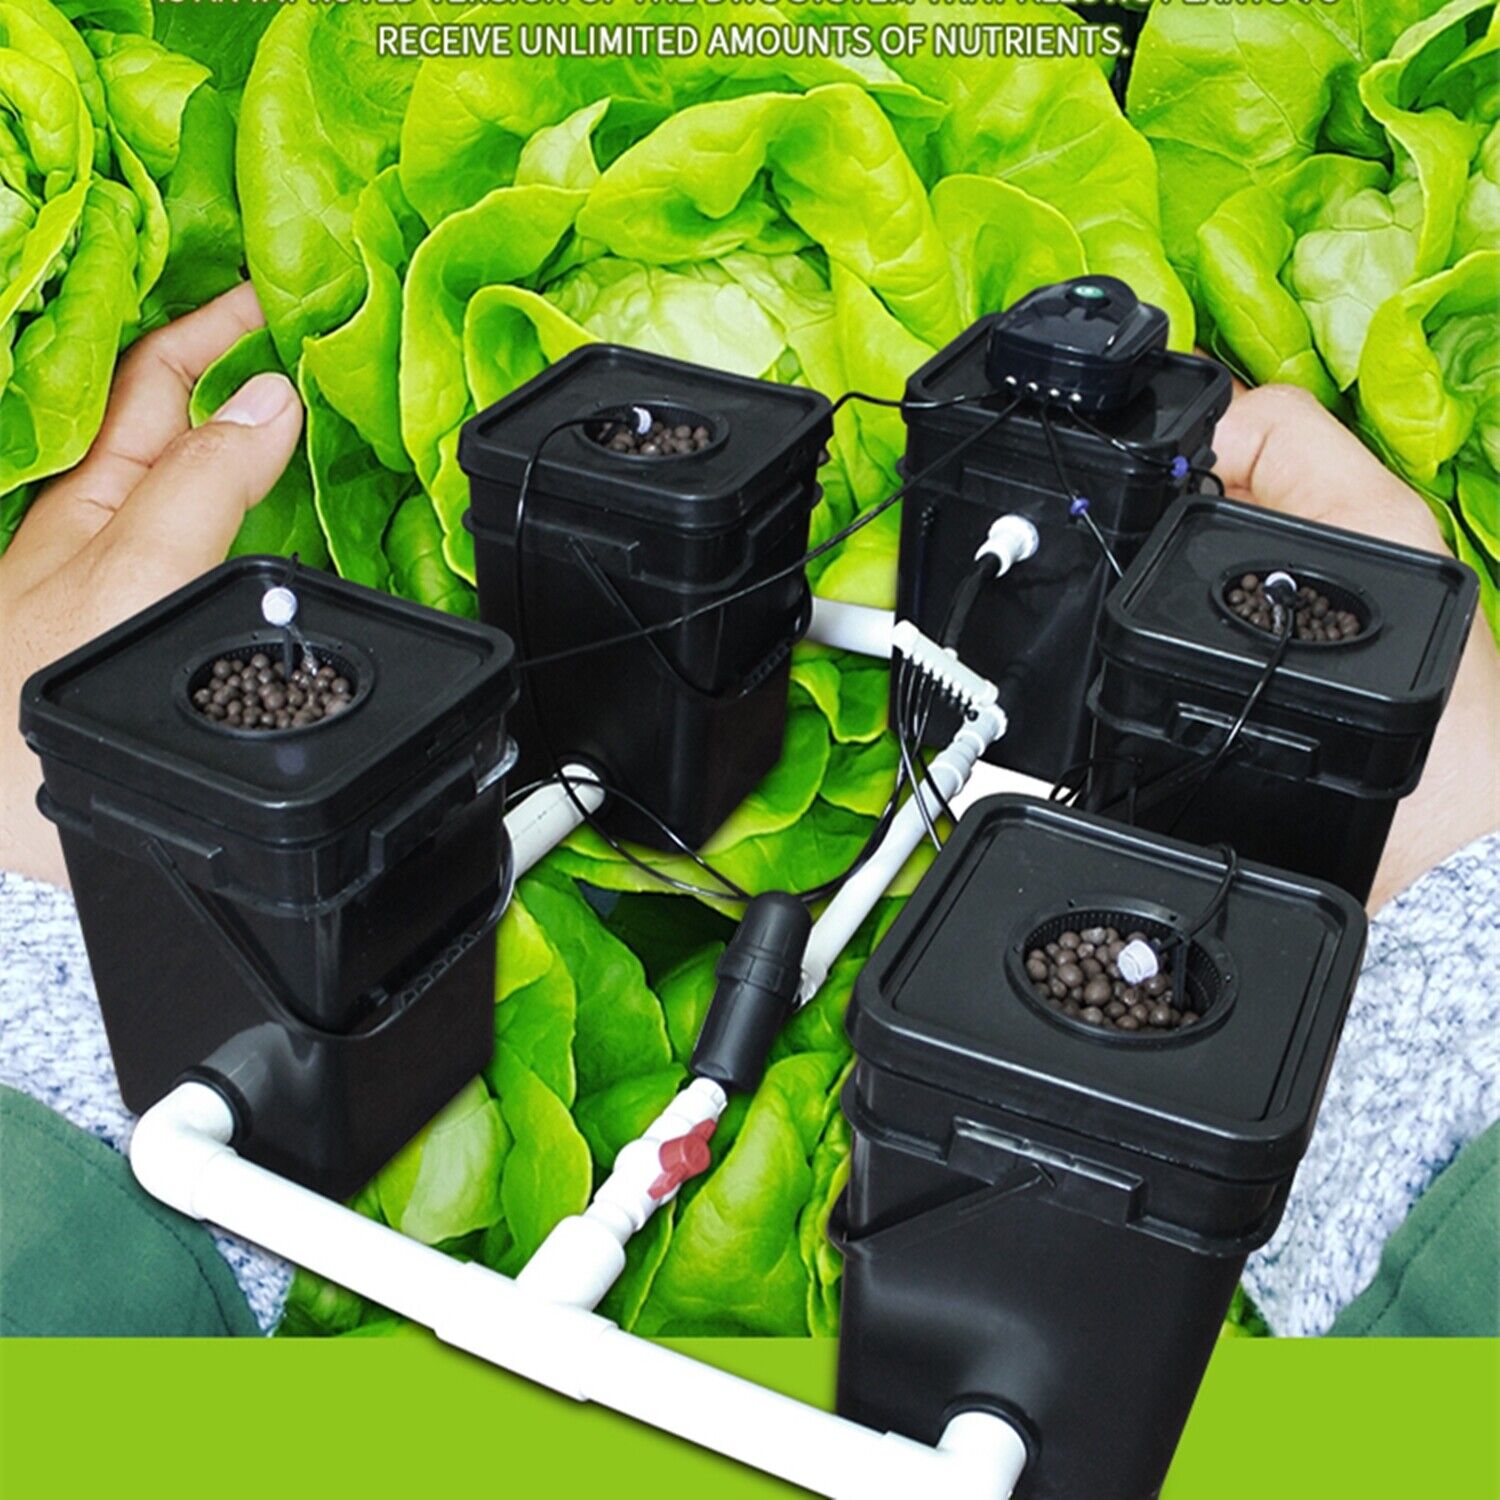 RDWC 4 Automated System Hydroponic Growing Kit Recirculating Deep Water Culture